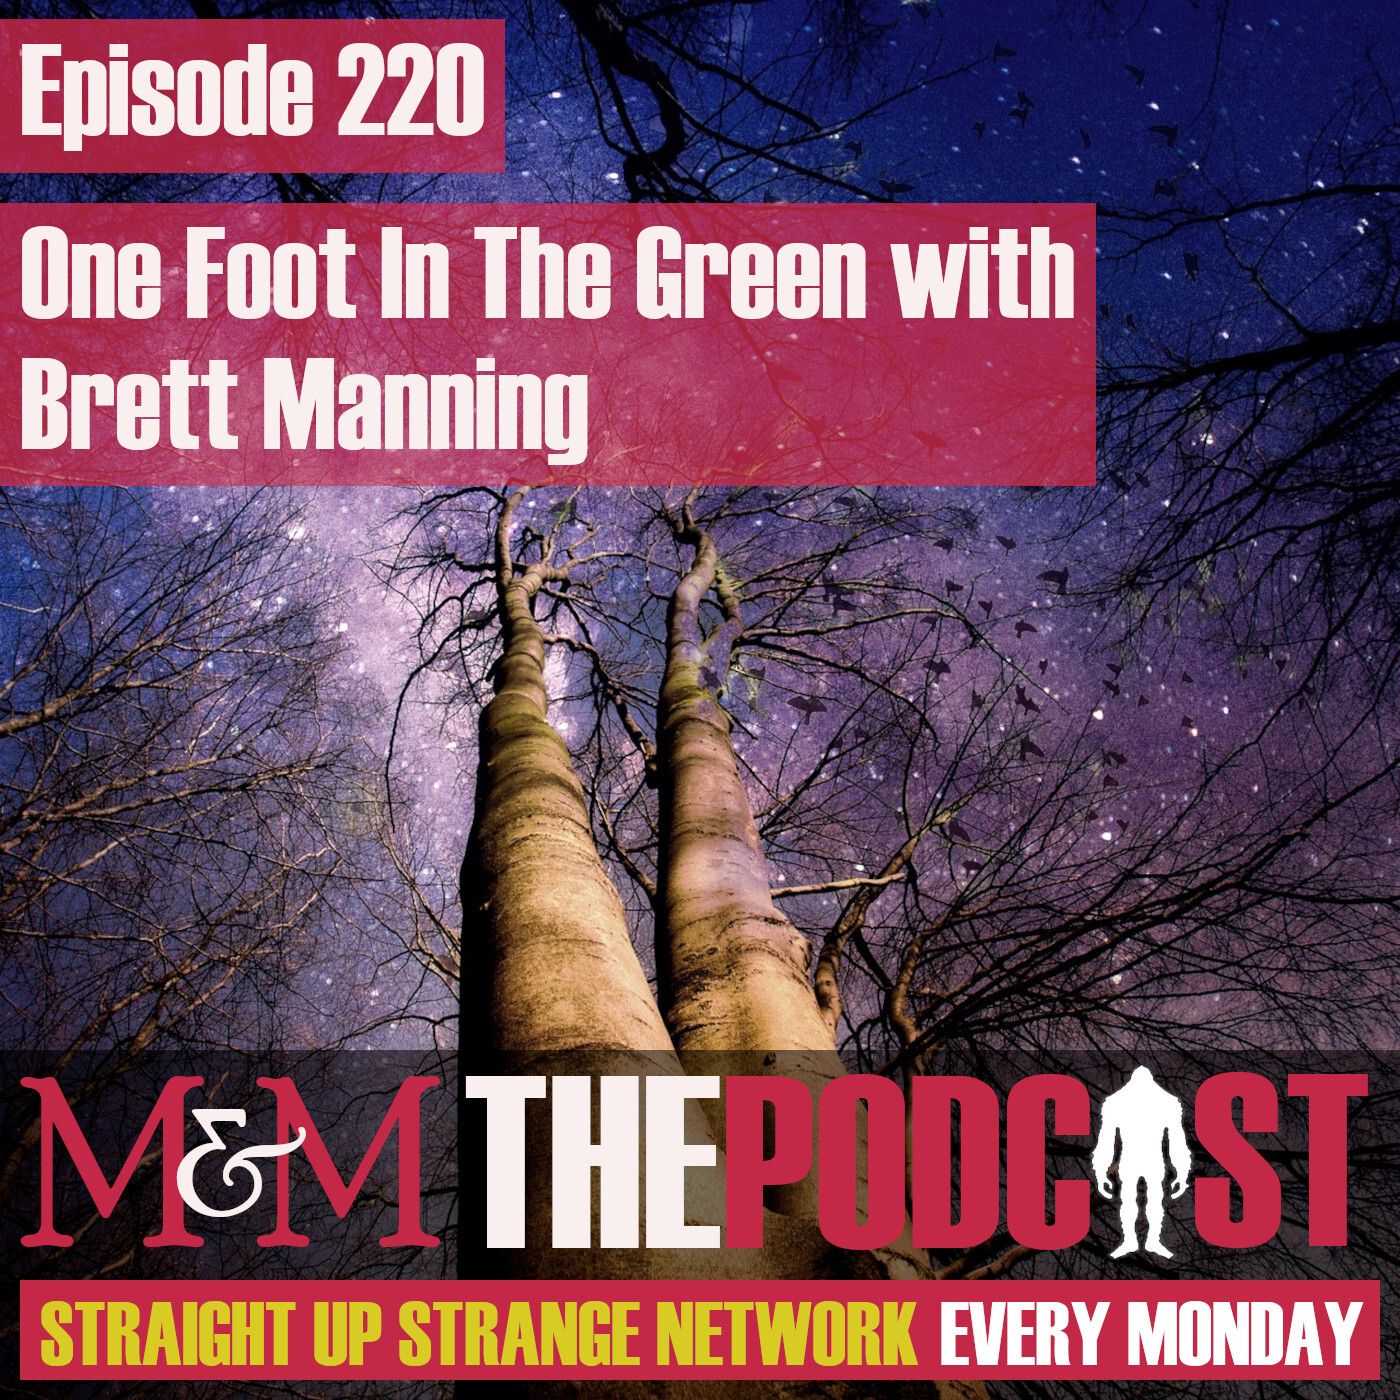 Mysteries and Monsters: Episode 220 One Foot In The Green with Brett Manning